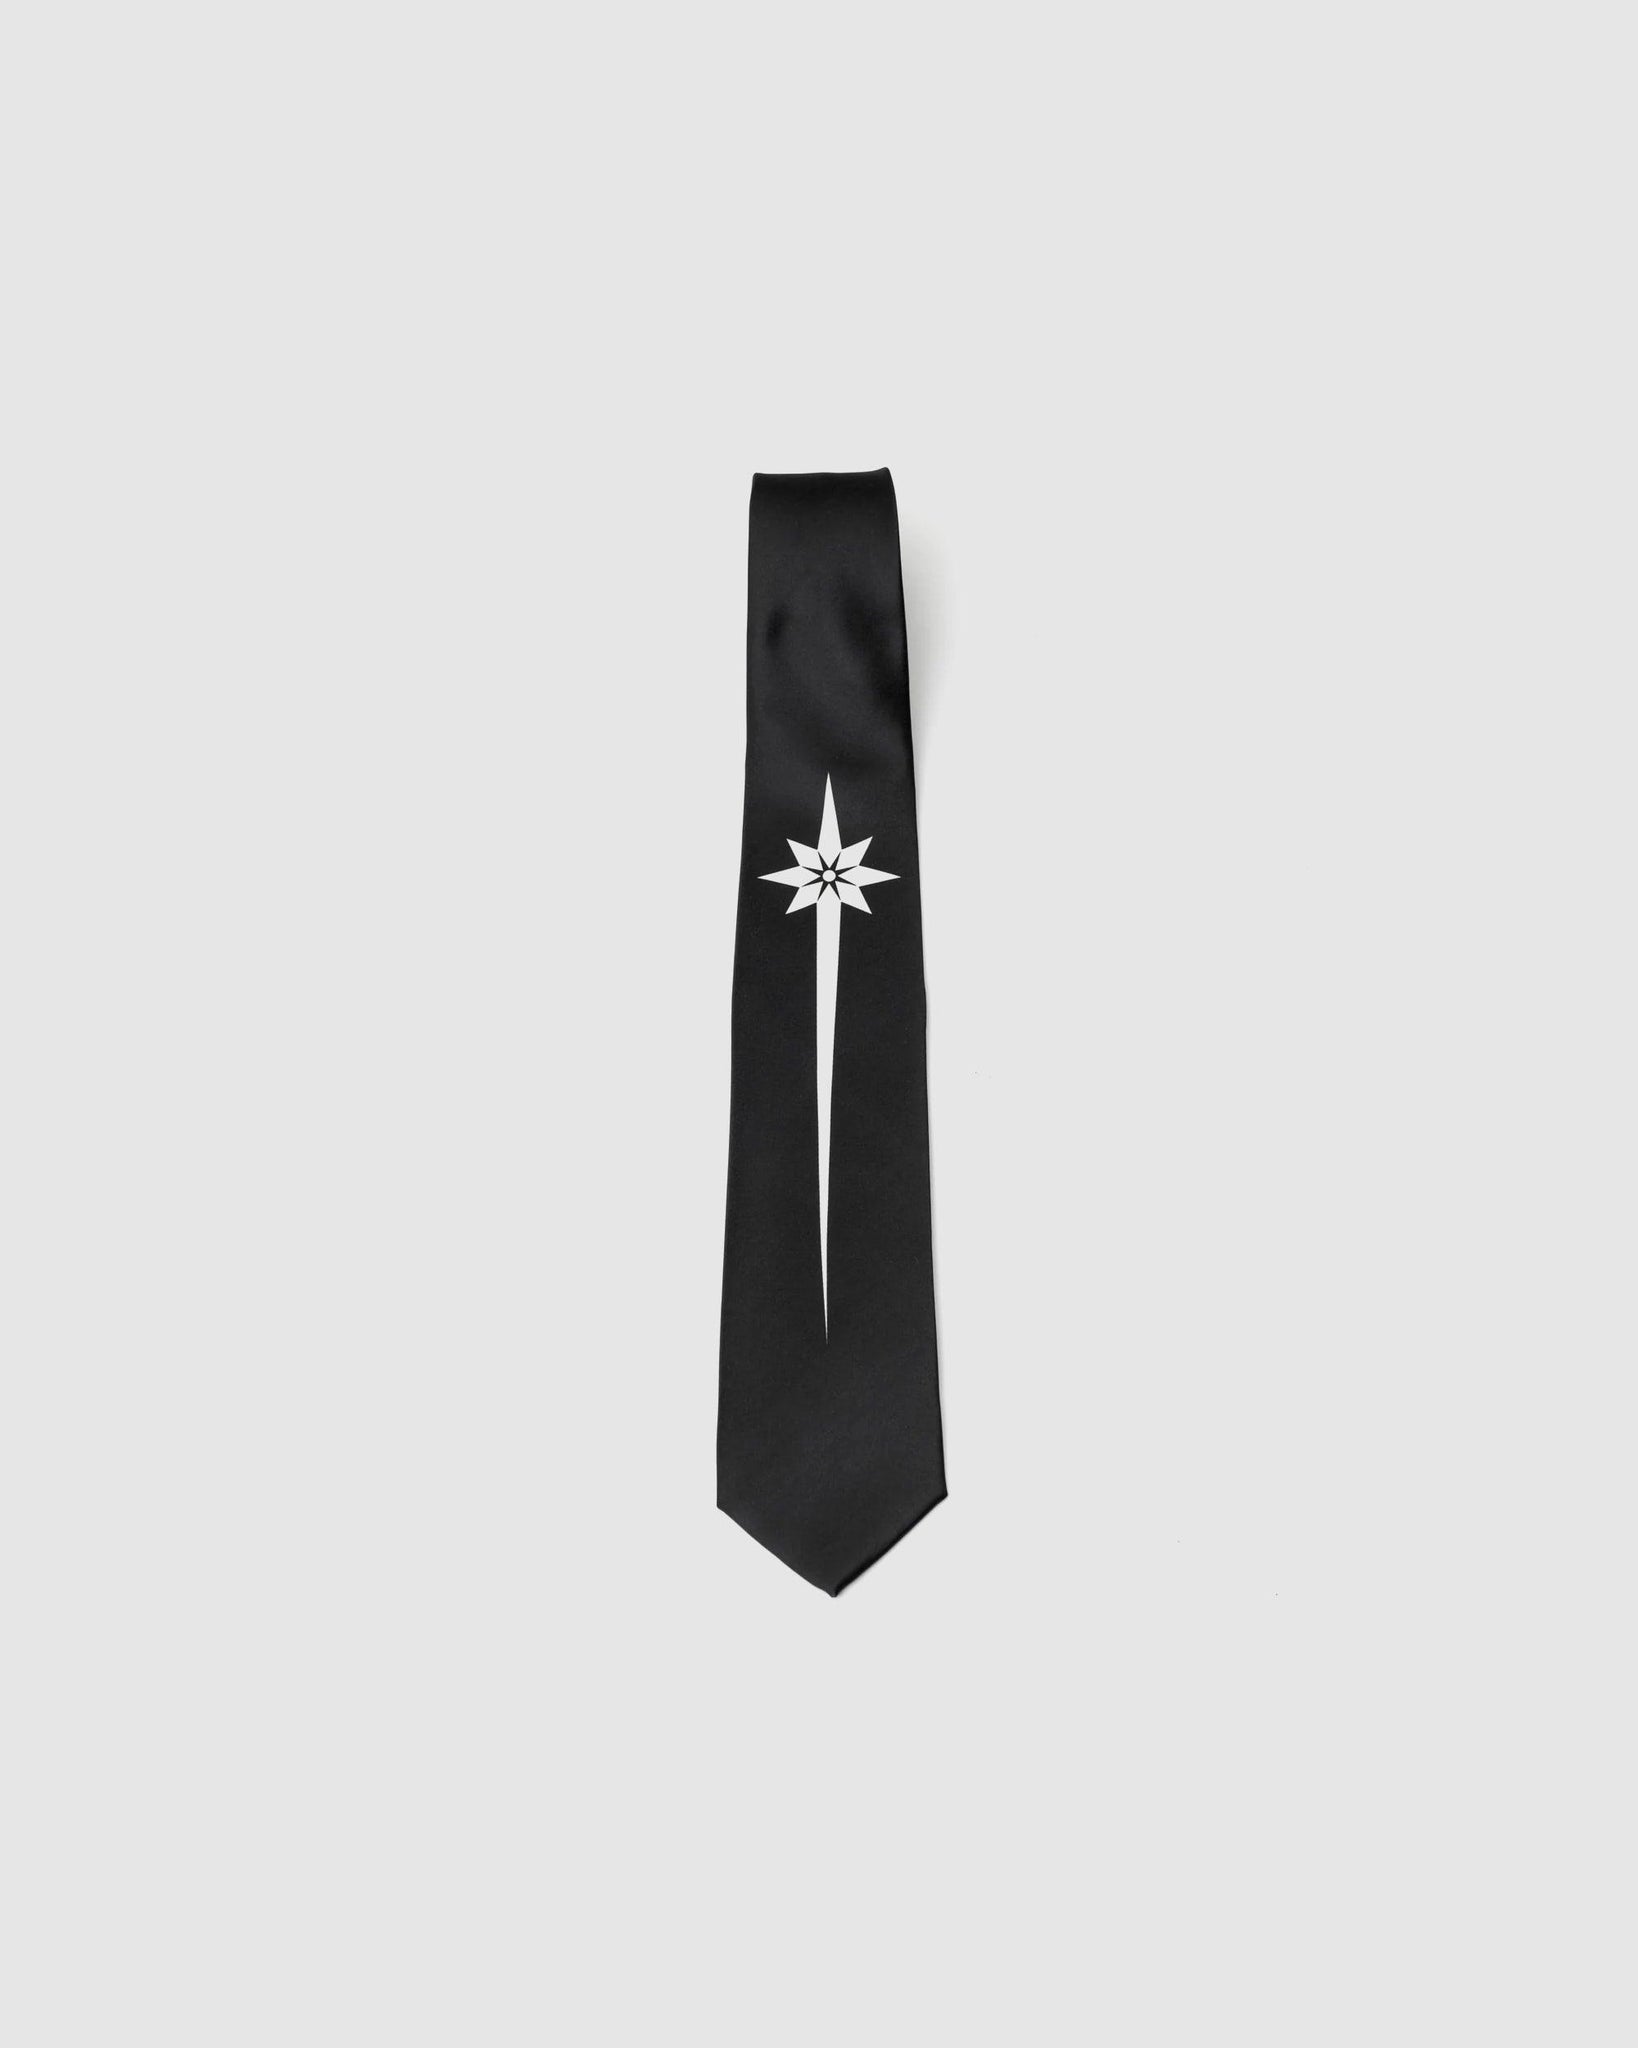 Origami Print Tie - {{ collection.title }} - Chinatown Country Club 